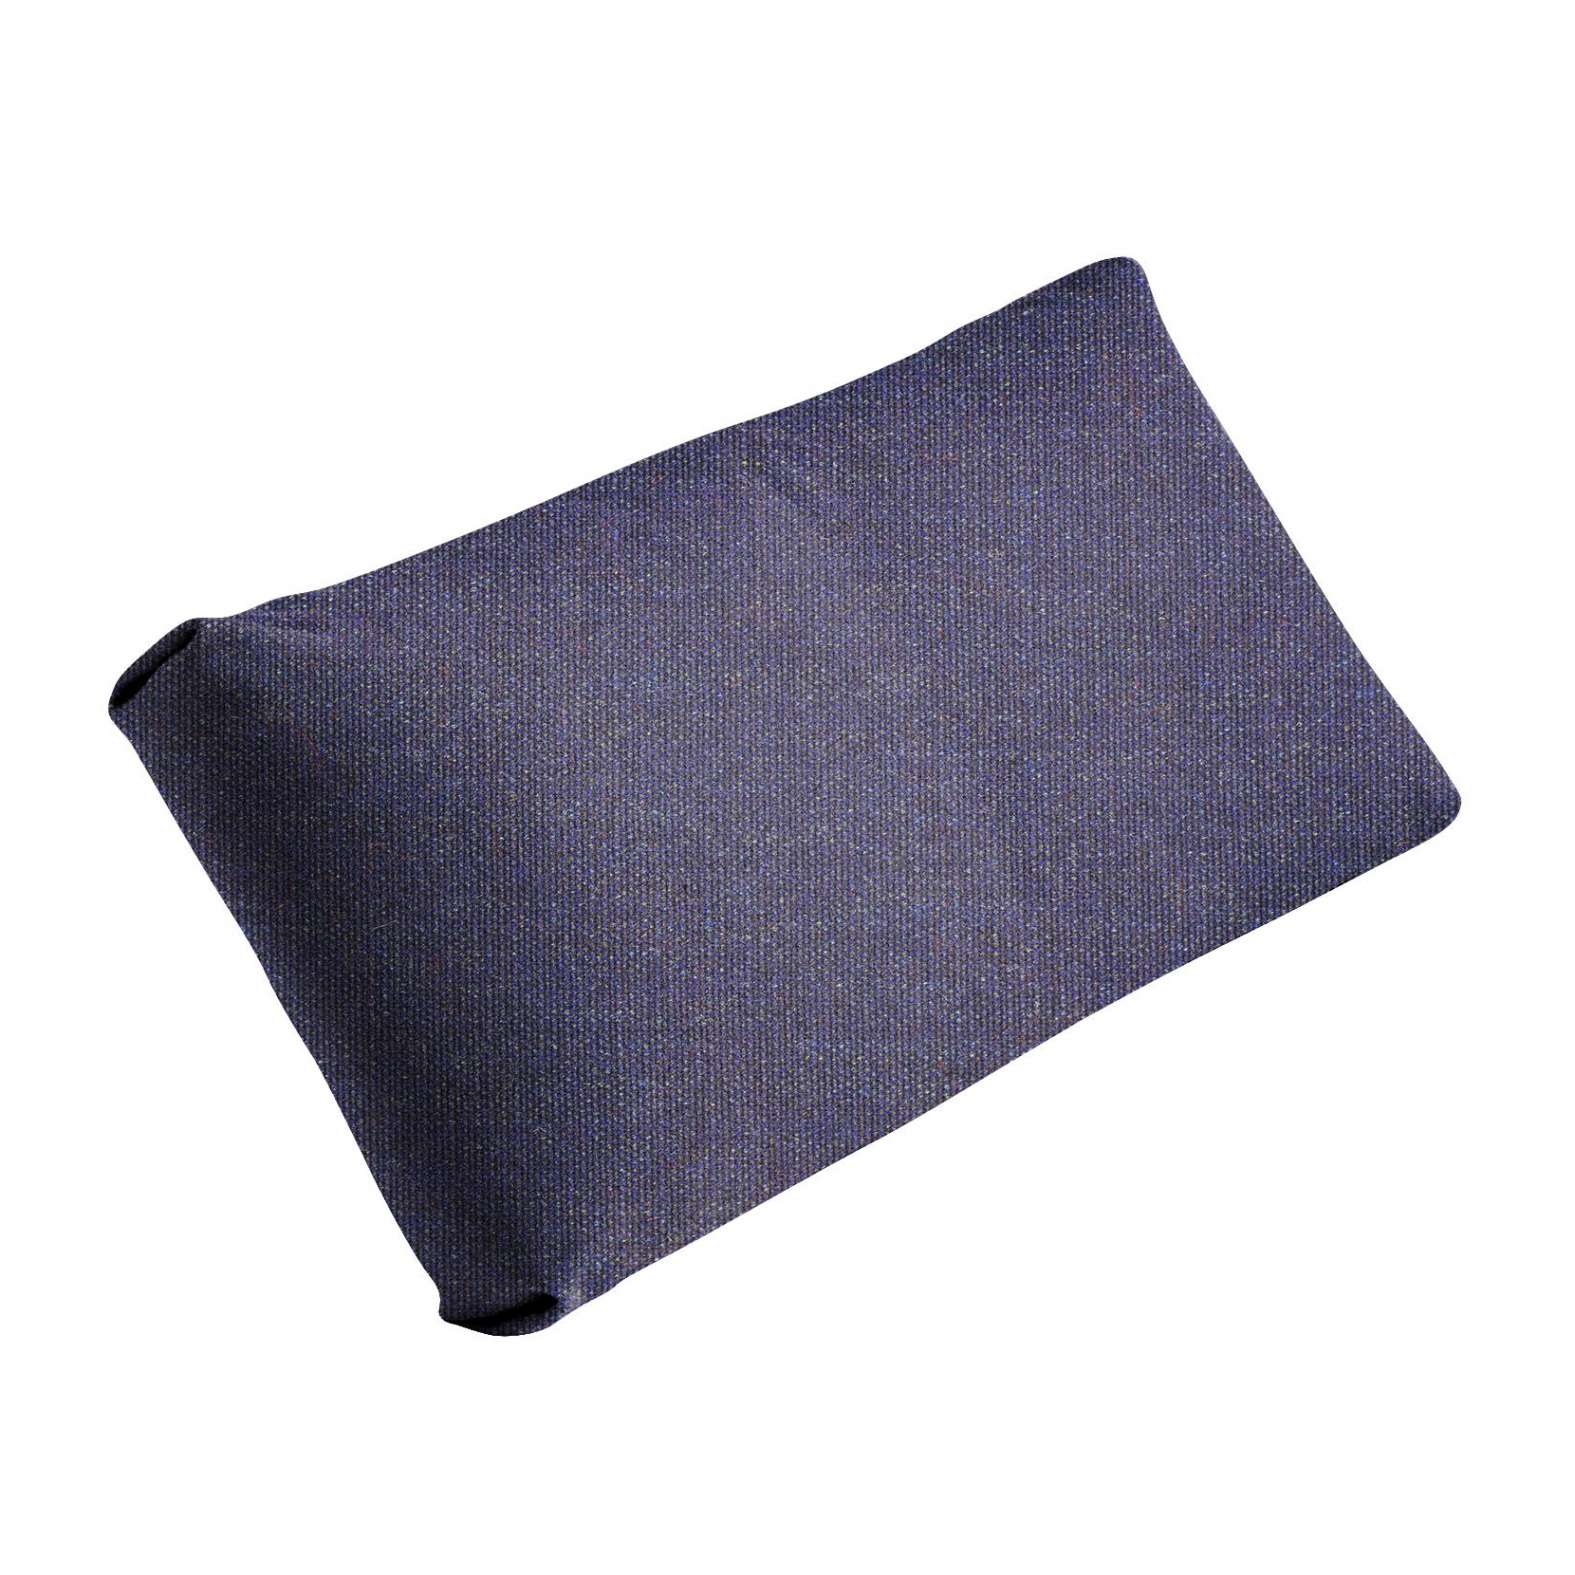 HAY - Coussin Mags 10 60x33cm - bleu marin/toffe Canvas 786/PxHxP 60x33x9cm